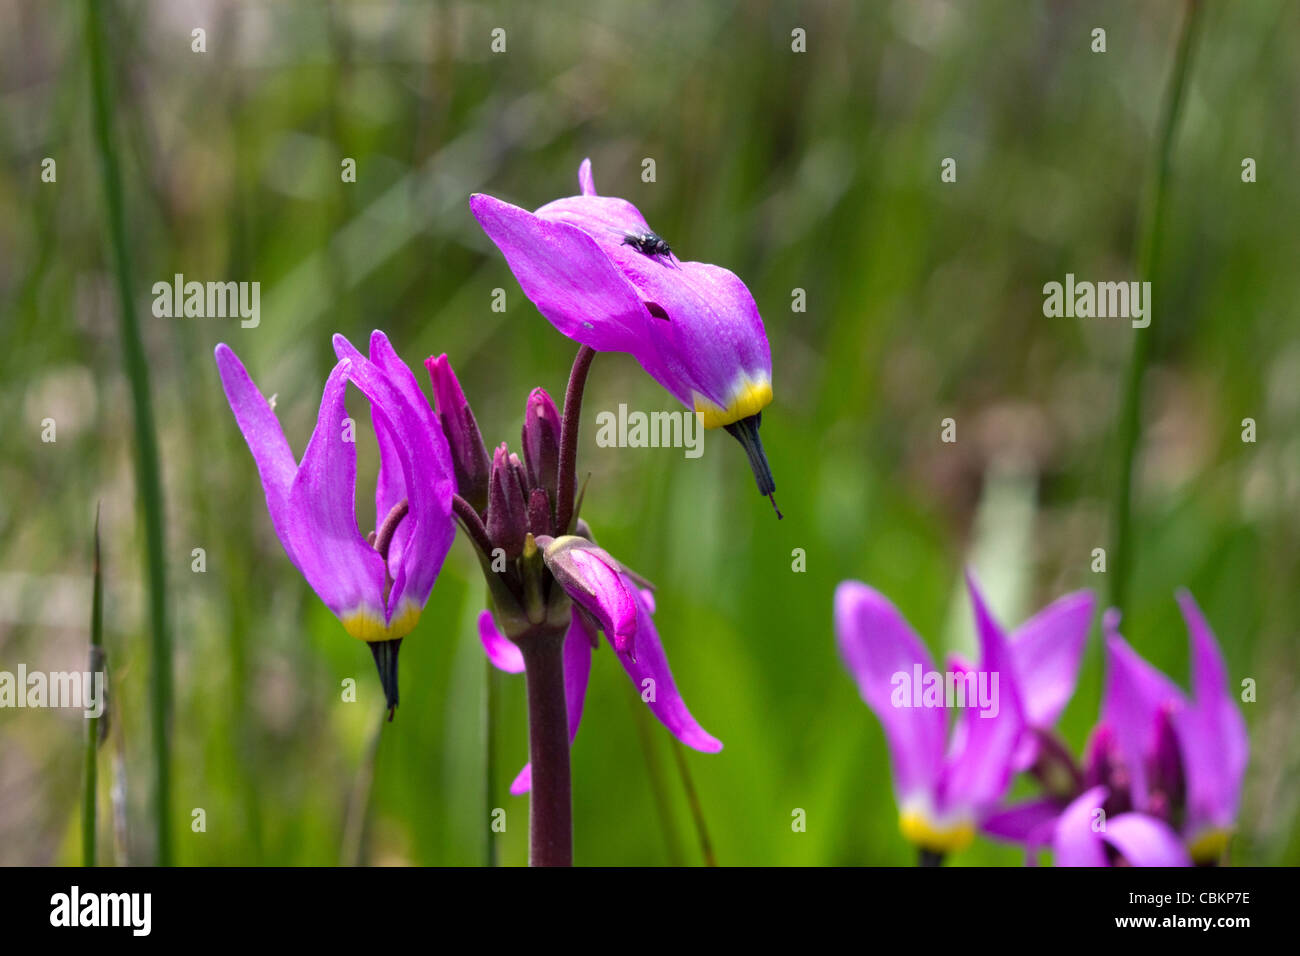 Dodecatheon pulchellum, commonly known as pretty shooting star flower in bloom. Stock Photo